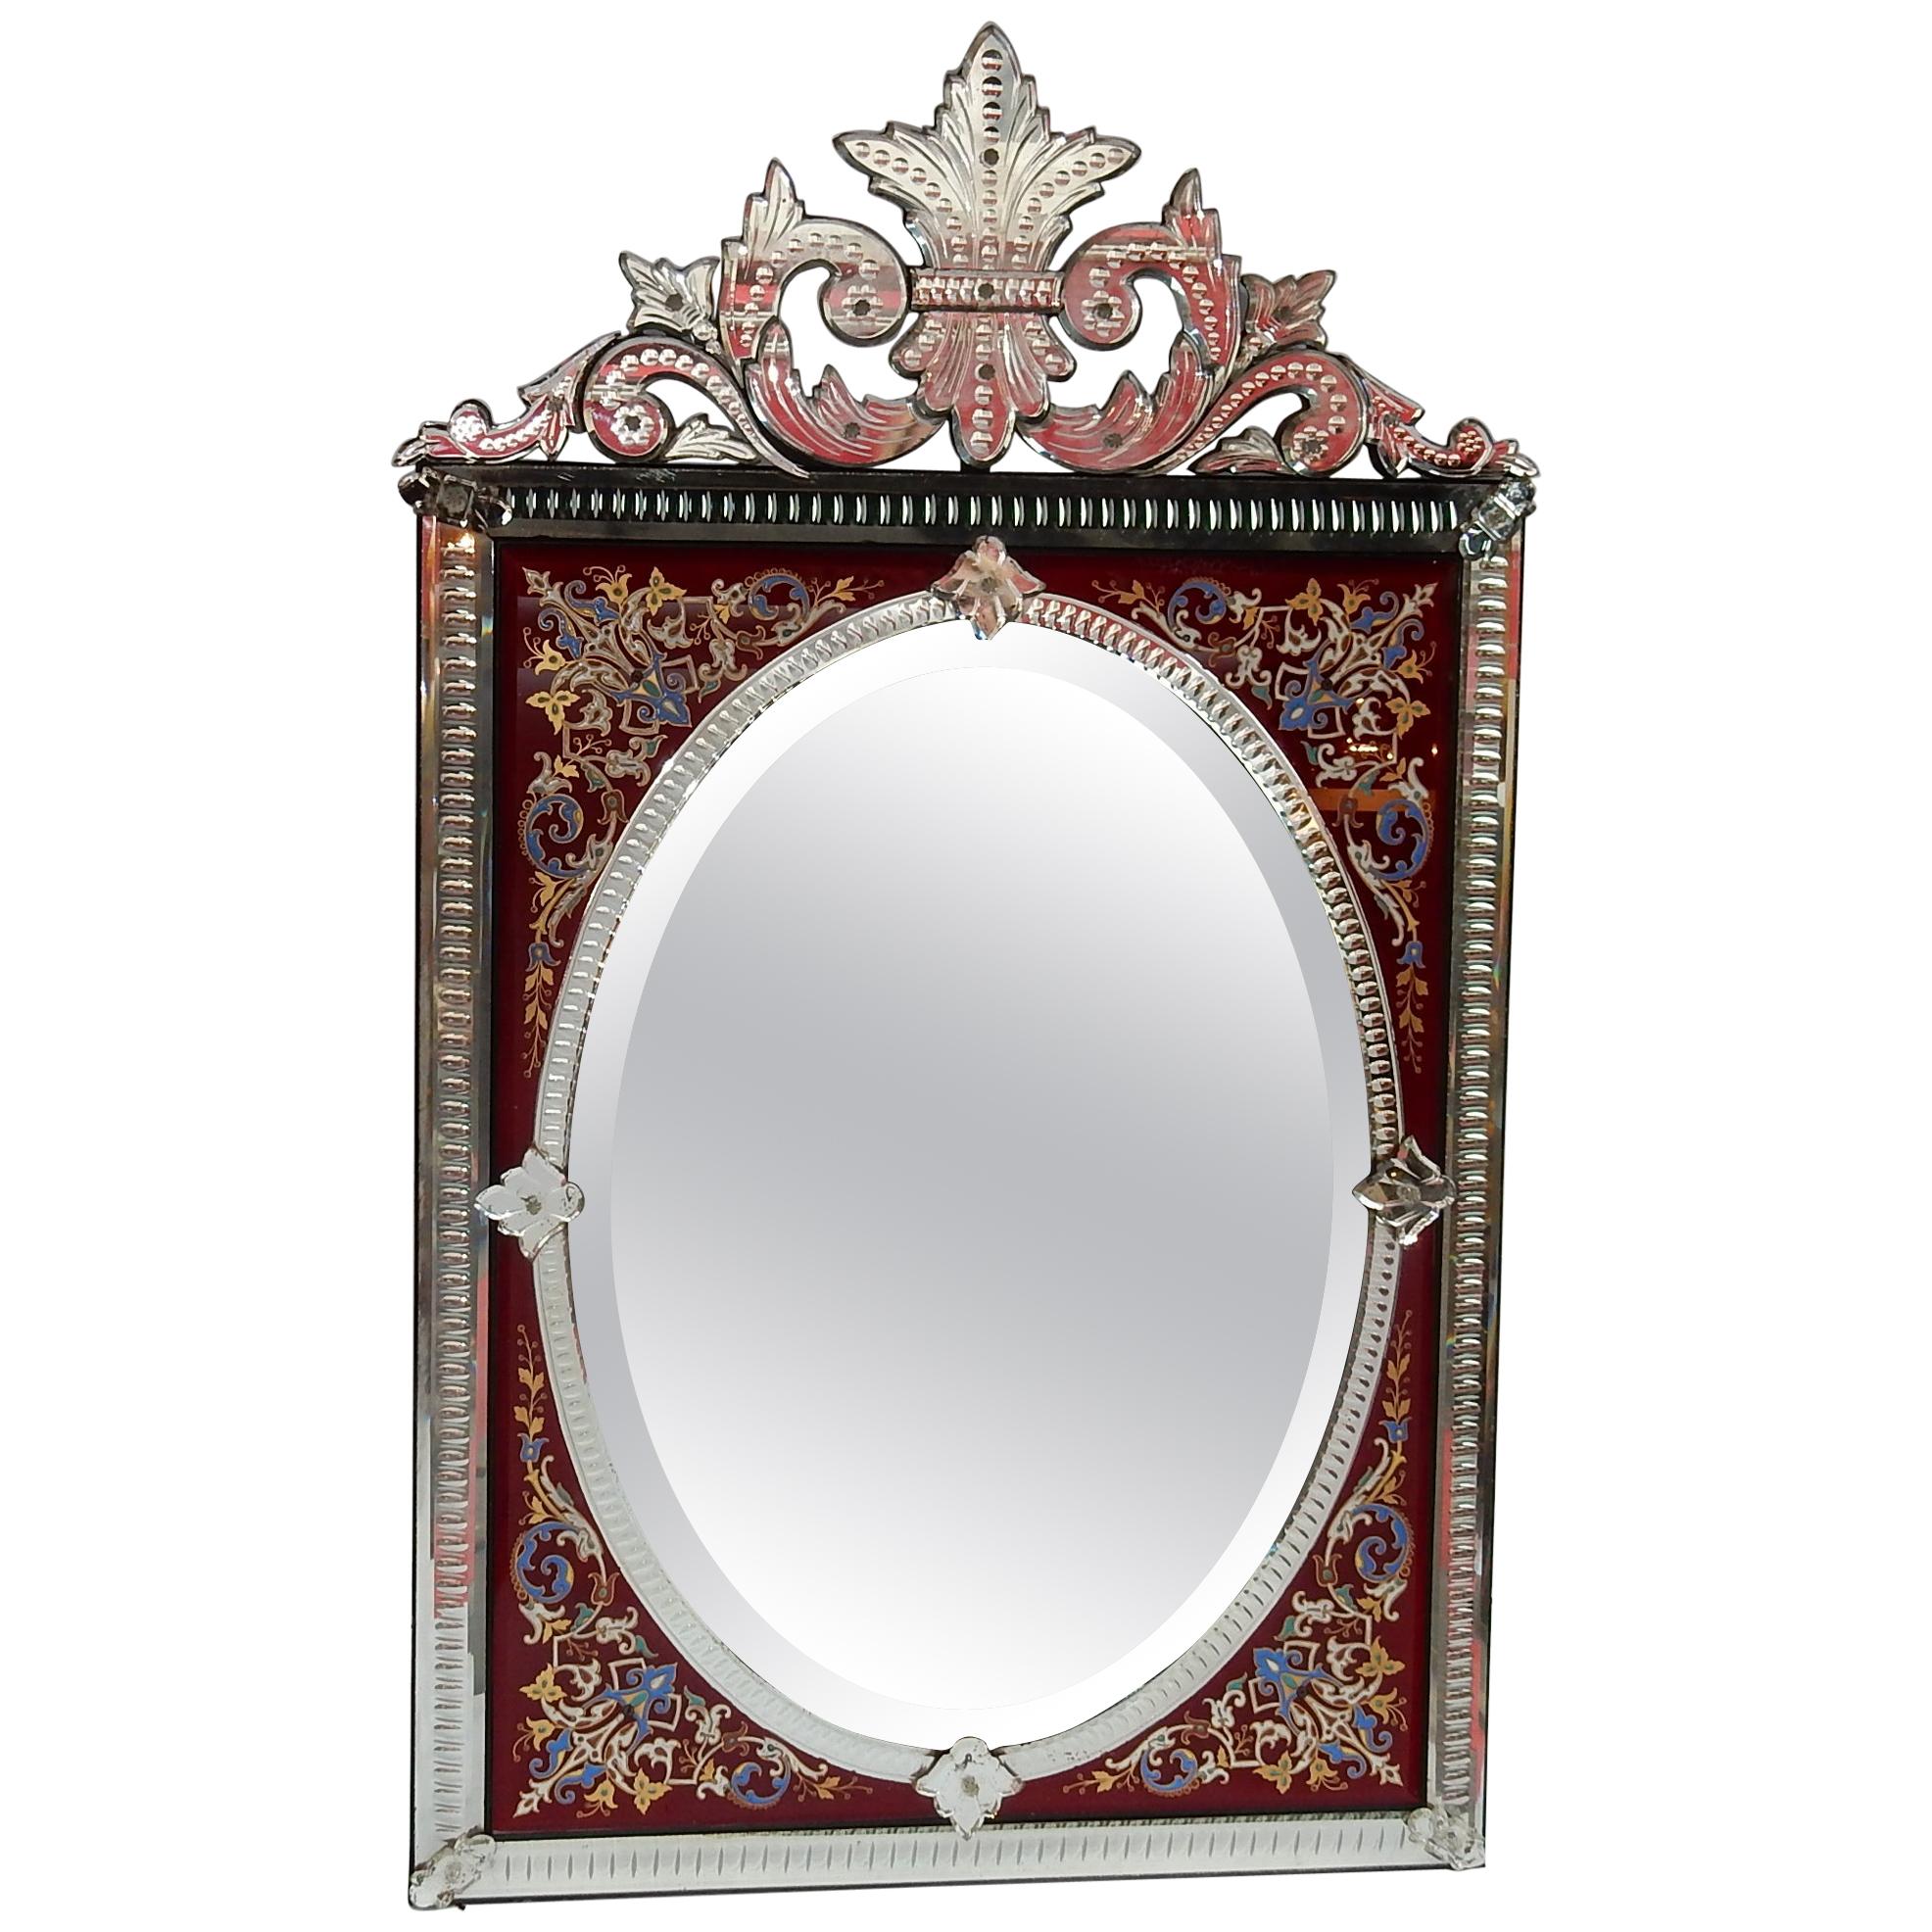 1880-1900 Venitian Mirror with Pediment - Red Color Glass Adorned with Flowers  For Sale